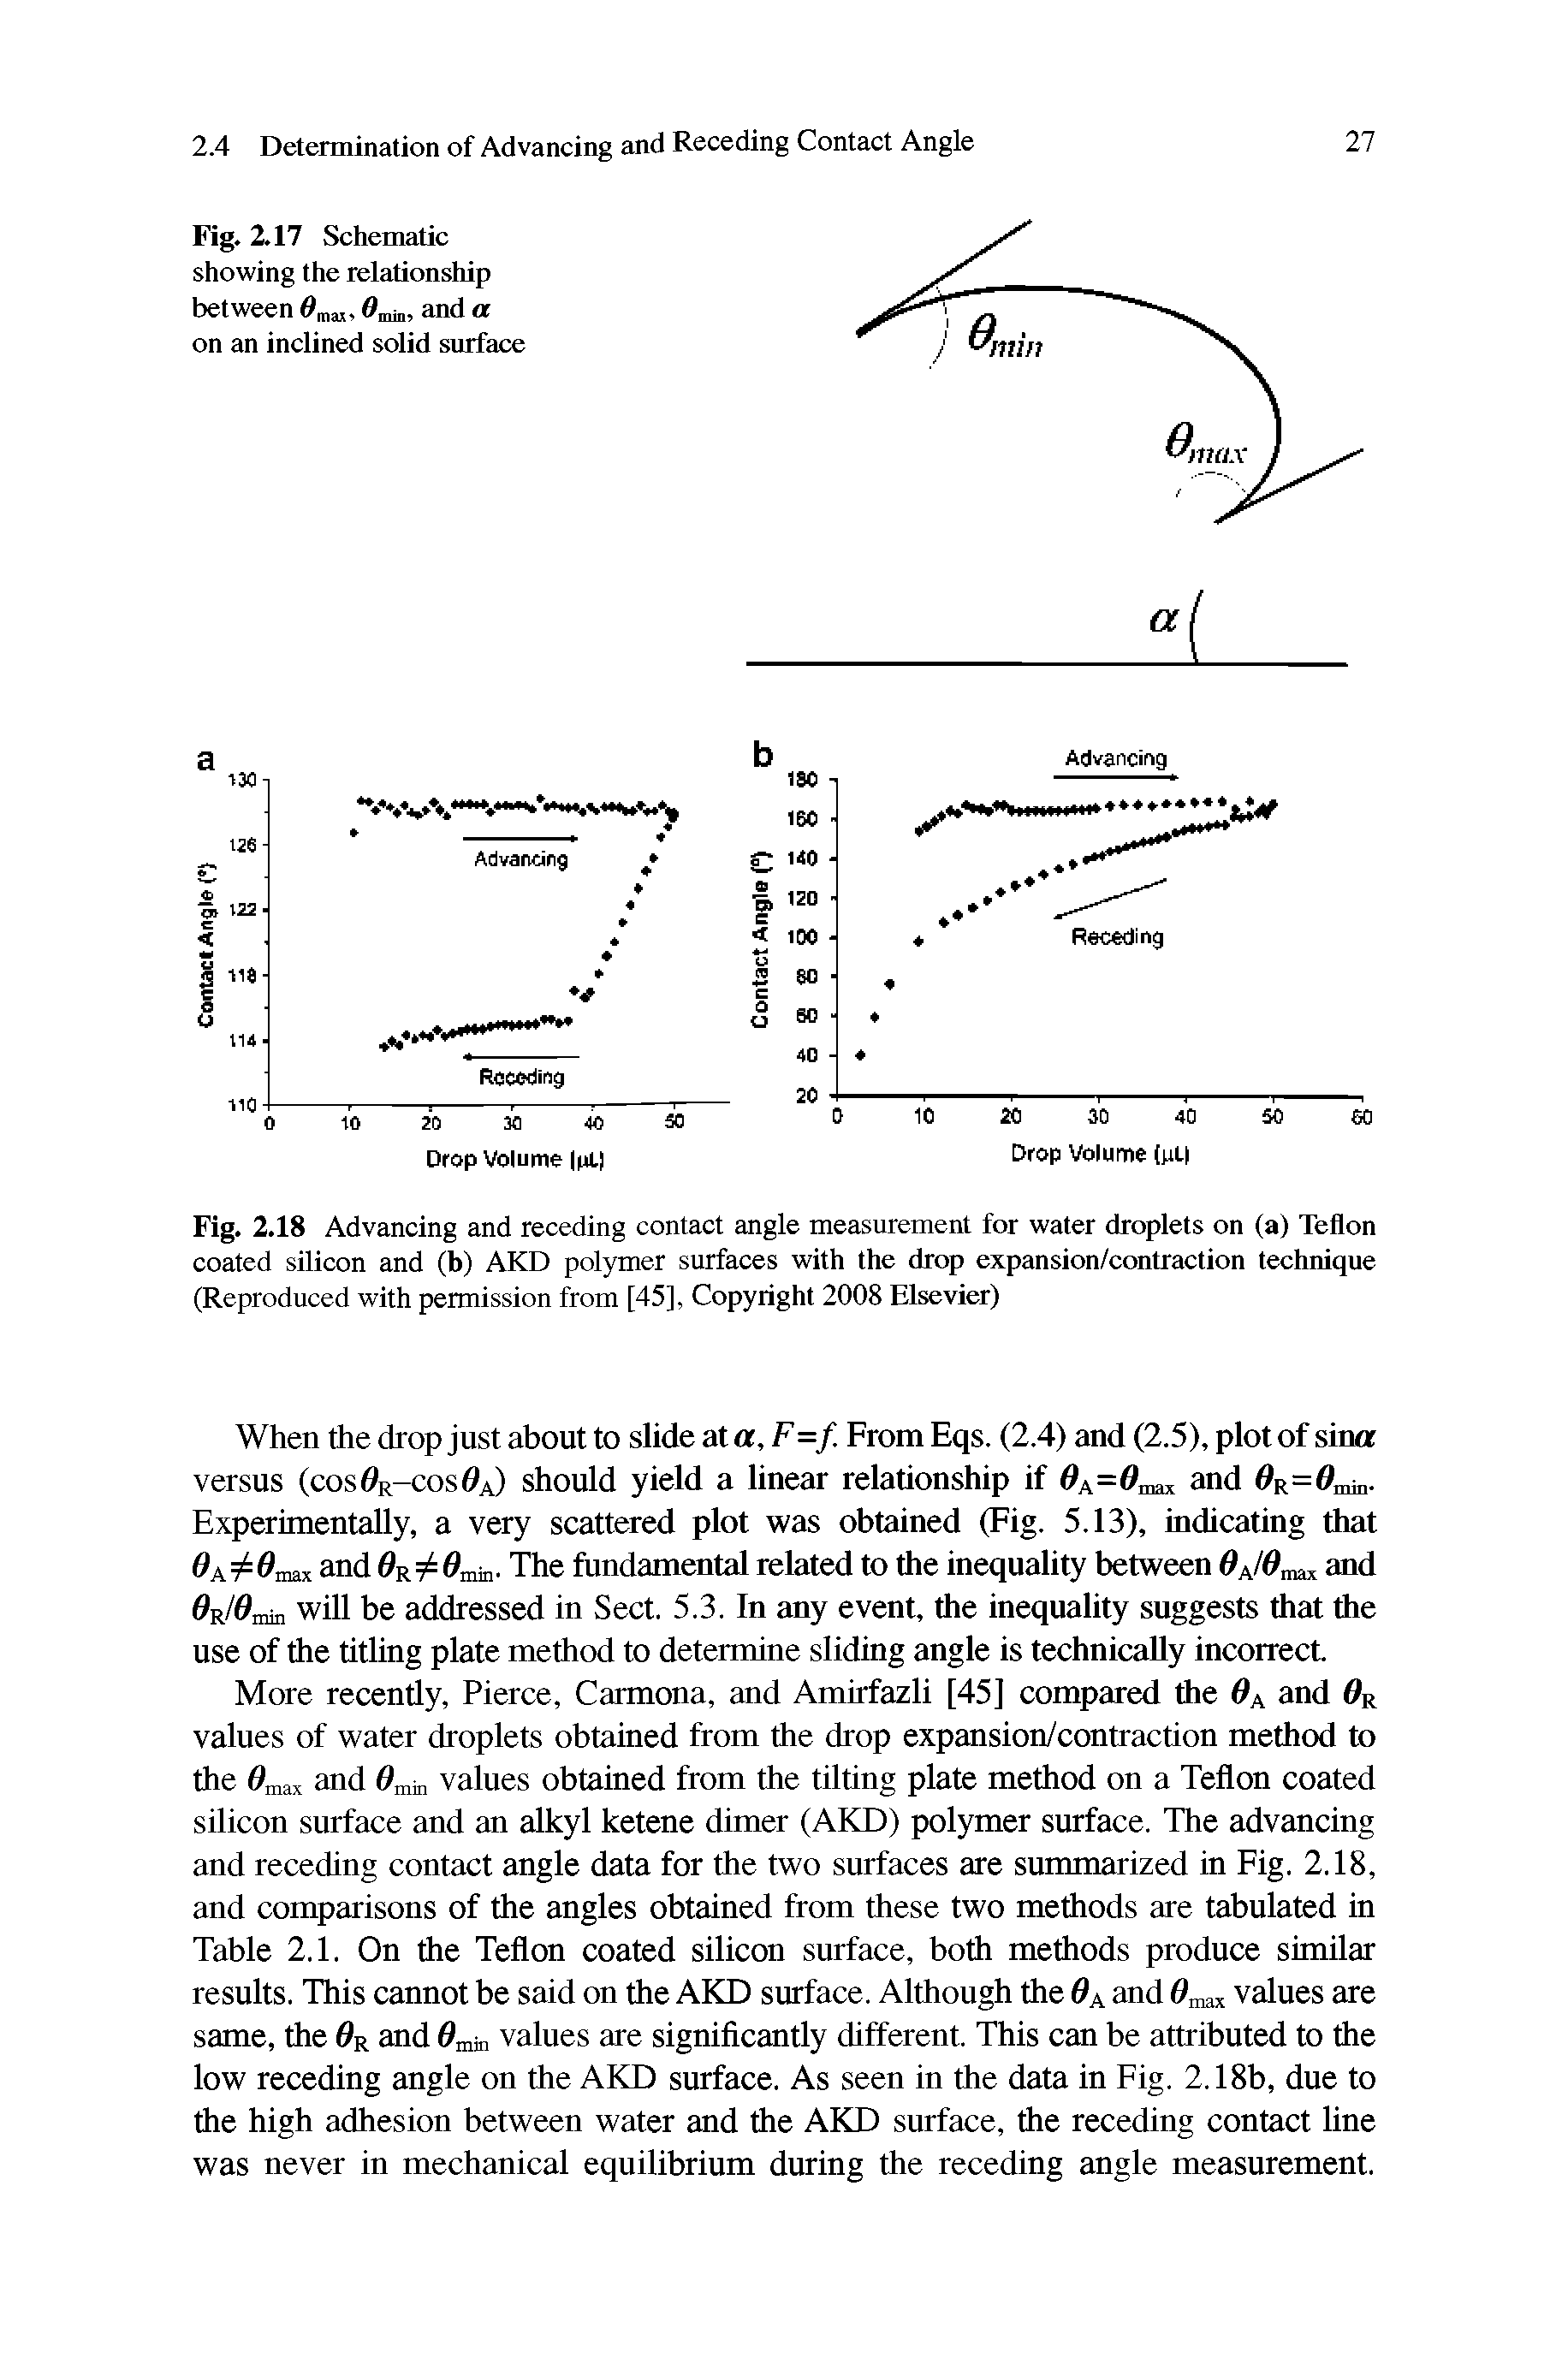 Fig. 2.18 Advancing and receding contact angle measurement for water droplets on (a) Teflon coated silicon and (b) AKD polymer surfaces with the drop expansion/contraction technique (Reproduced with permission from [45], Copyright 2008 Elsevier)...